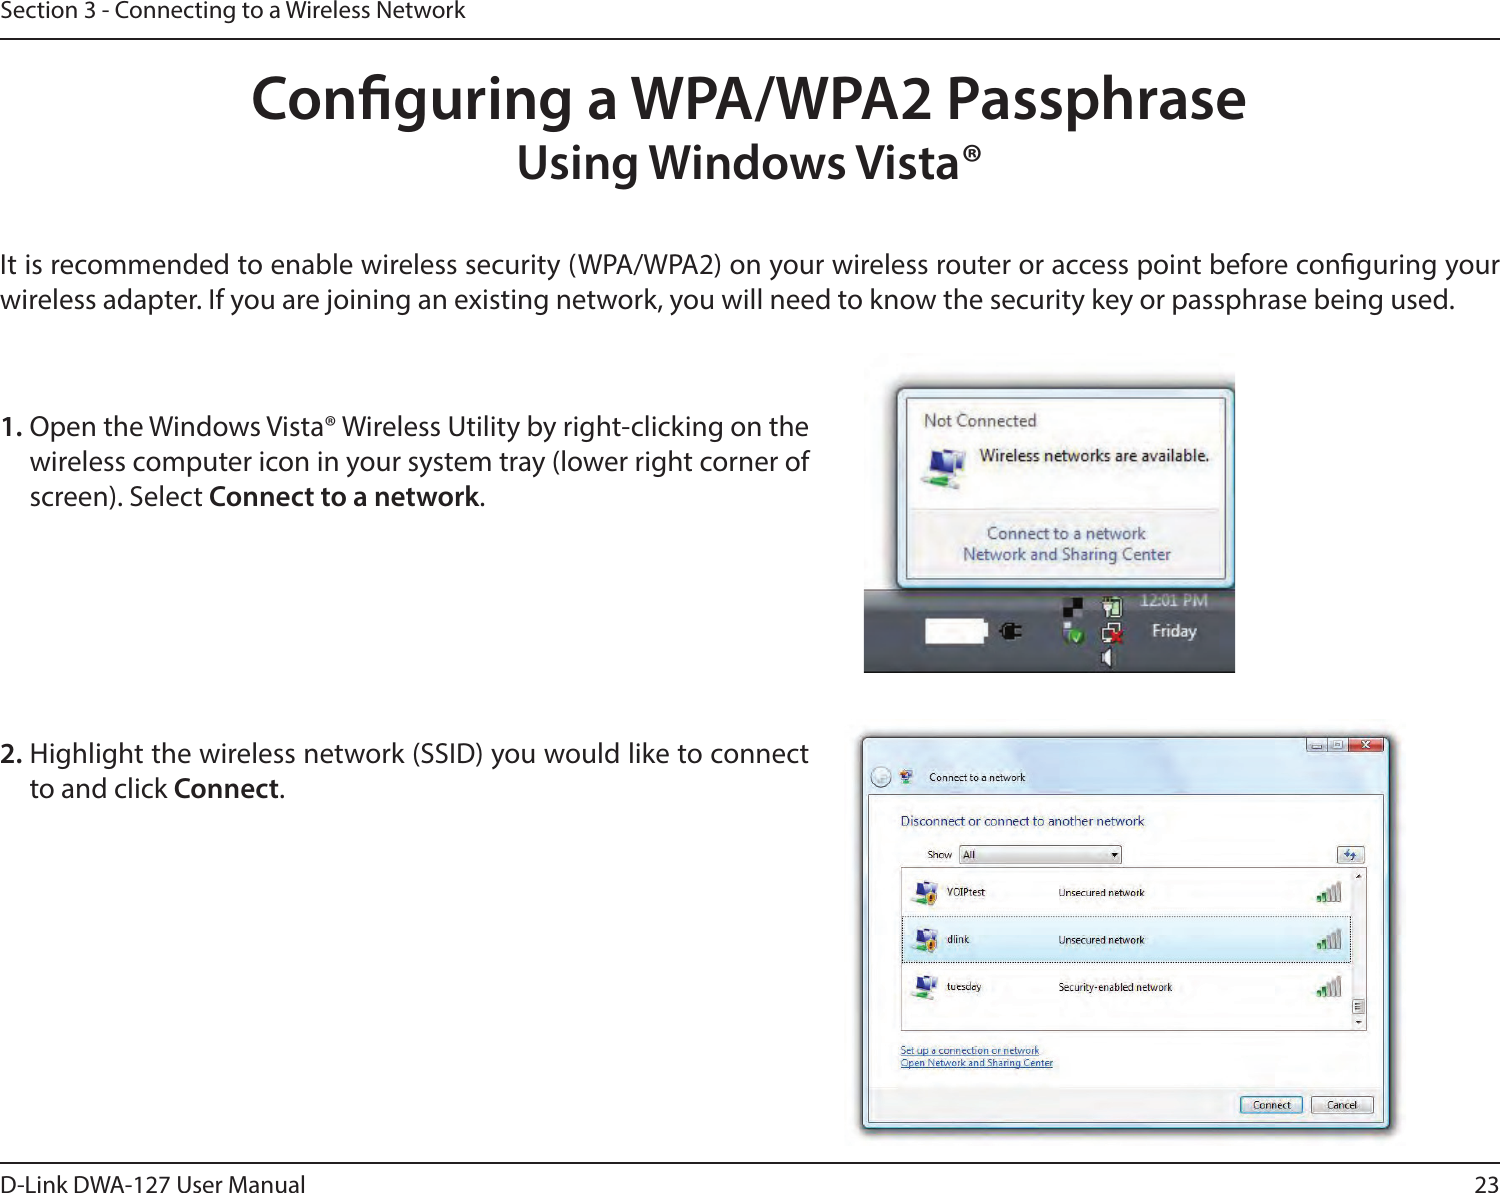 23D-Link DWA-127 User ManualSection 3 - Connecting to a Wireless NetworkConguring a WPA/WPA2 PassphraseUsing Windows Vista® It is recommended to enable wireless security (WPA/WPA2) on your wireless router or access point before conguring your wireless adapter. If you are joining an existing network, you will need to know the security key or passphrase being used.2. Highlight the wireless network (SSID) you would like to connect to and click Connect.1. Open the Windows Vista® Wireless Utility by right-clicking on the wireless computer icon in your system tray (lower right corner of screen). Select Connect to a network. 